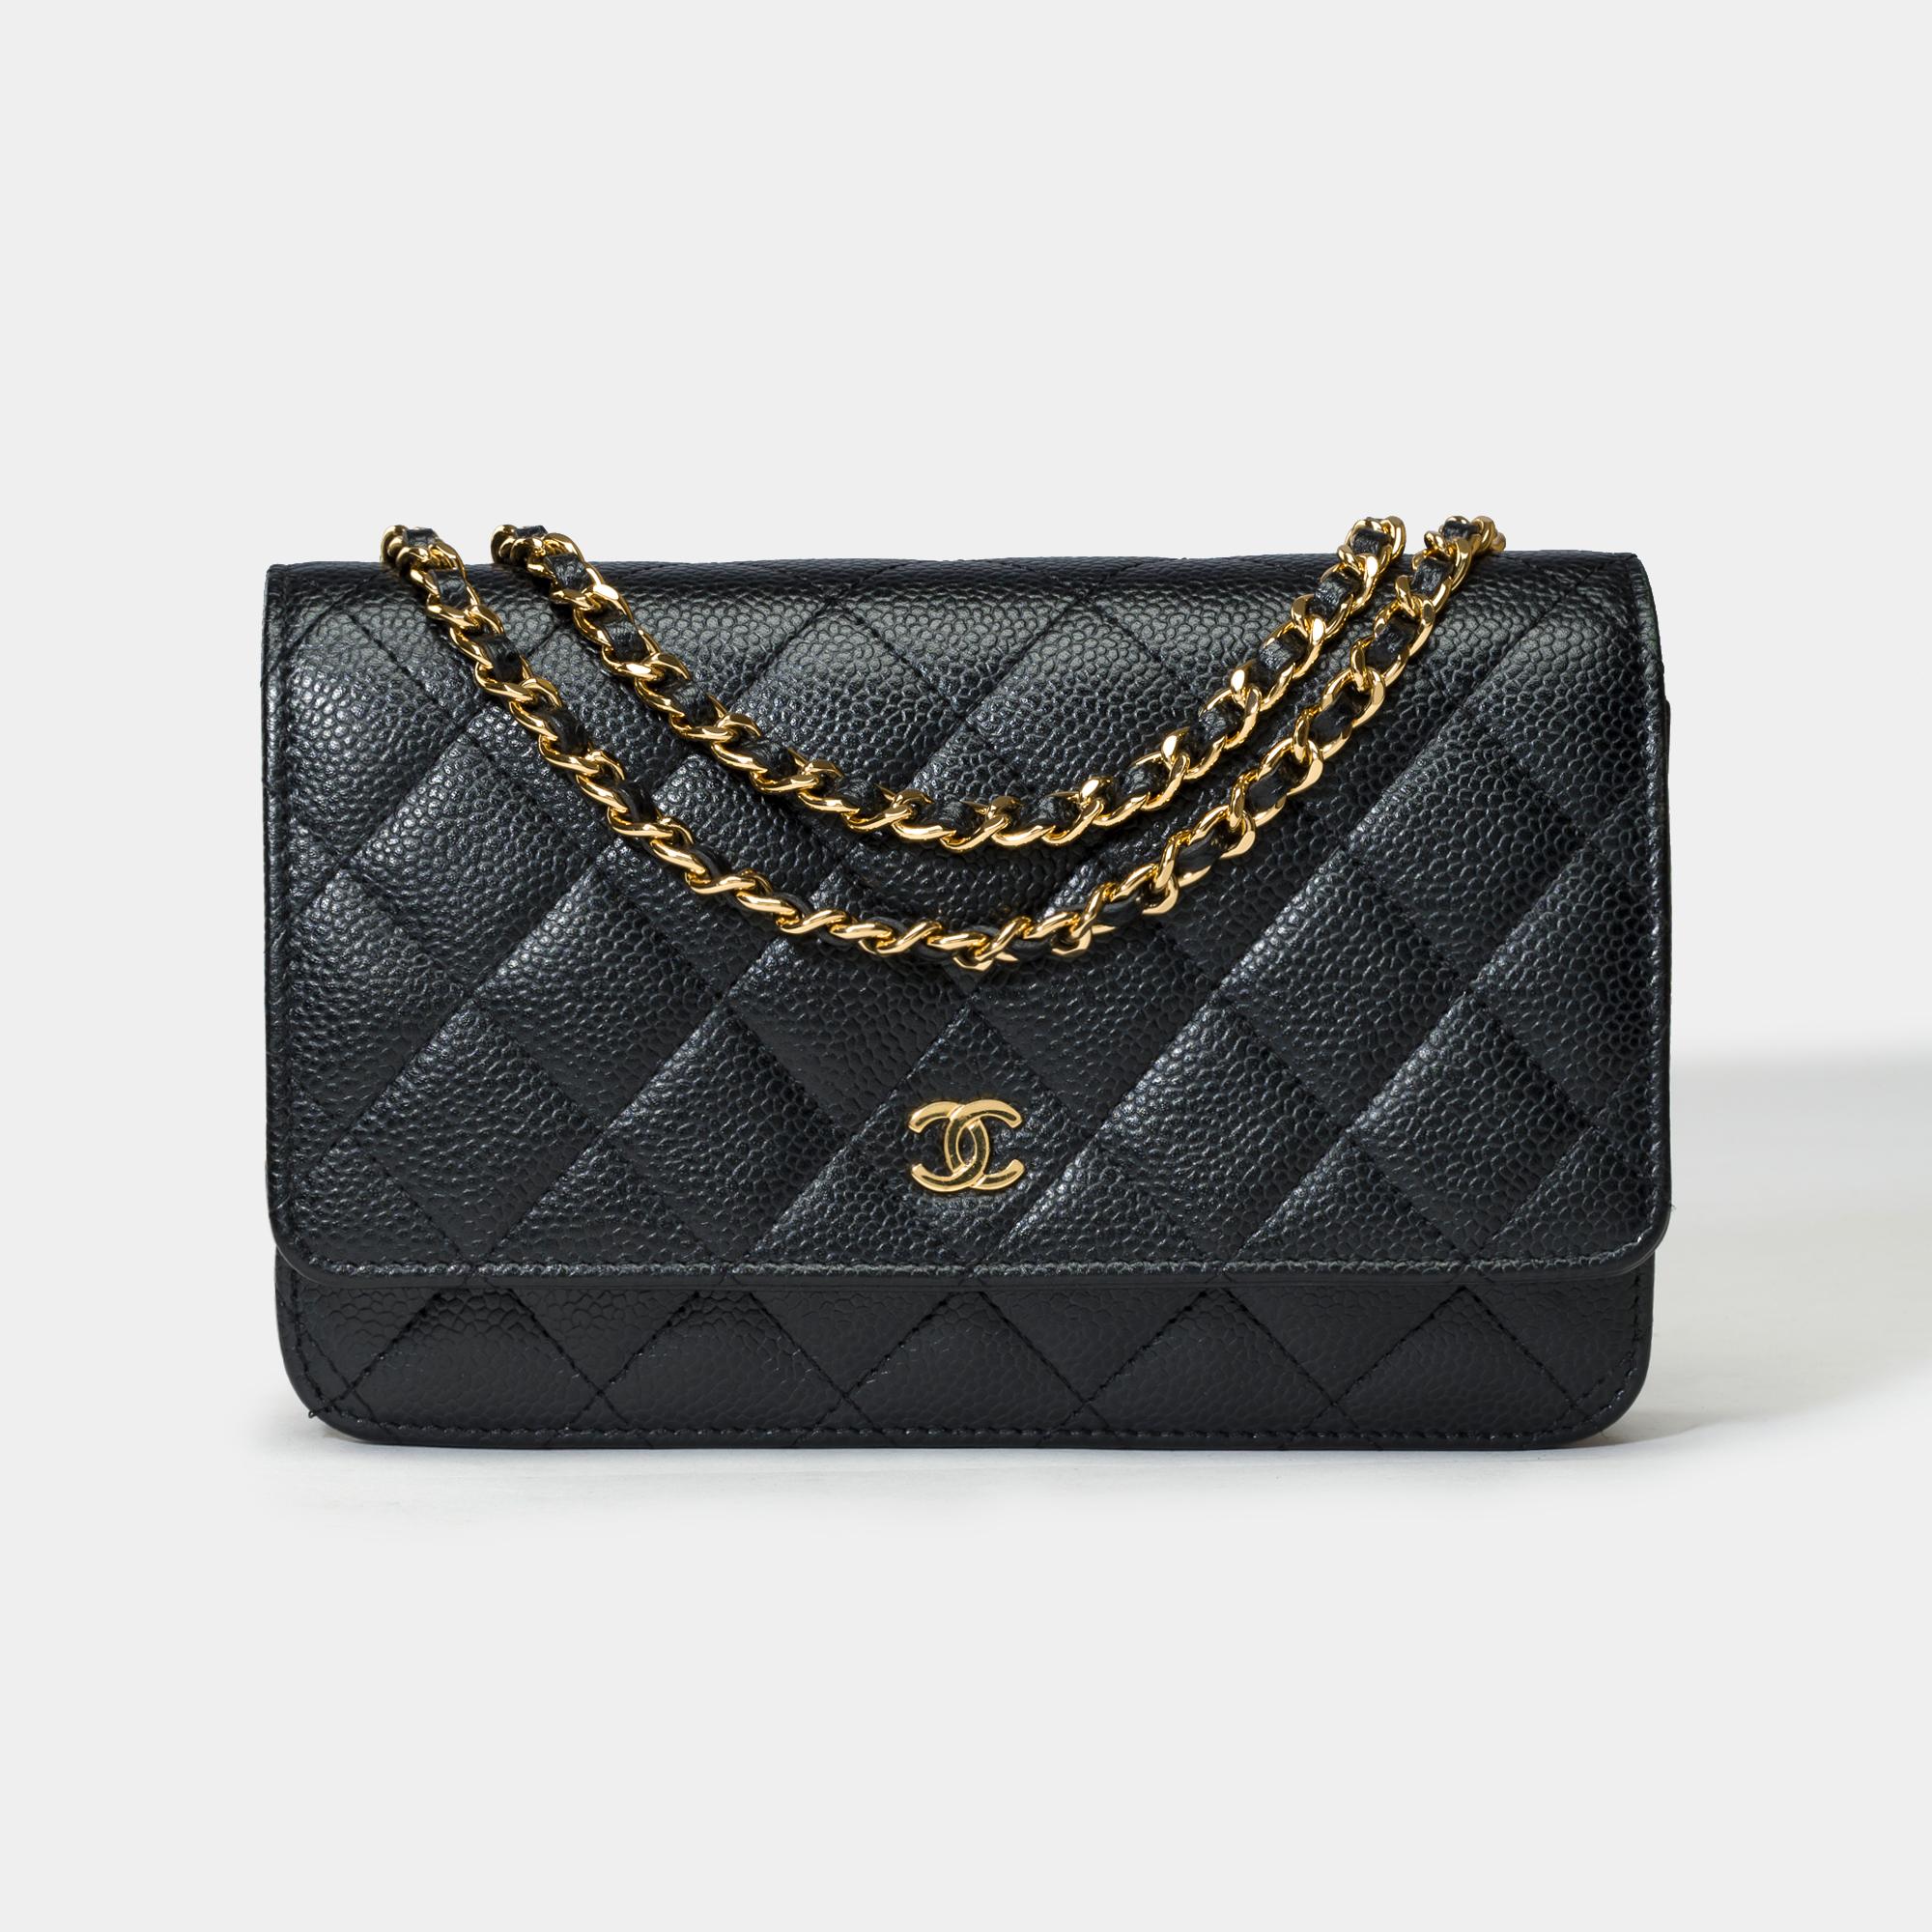 Lovely​​​​ ​​​​Chanel​​​​ ​​​​Wallet​​​​ ​​​​On​​​​ ​​​​Chain(WOC)​​​​ ​​​​shoulder​​​​ ​​​​bag​​​​ ​​​​​​​​ ​​​​in​​​​ ​​​​black​​​​ ​​​​quilted​​​​ ​​​​caviar​​​​ ​​​​leather,​​​​ ​​​​gold​​​​ ​​​​metal​​​​ ​​​​trim,​​​​ ​​​​a​​​​ ​​​​gold​​​​